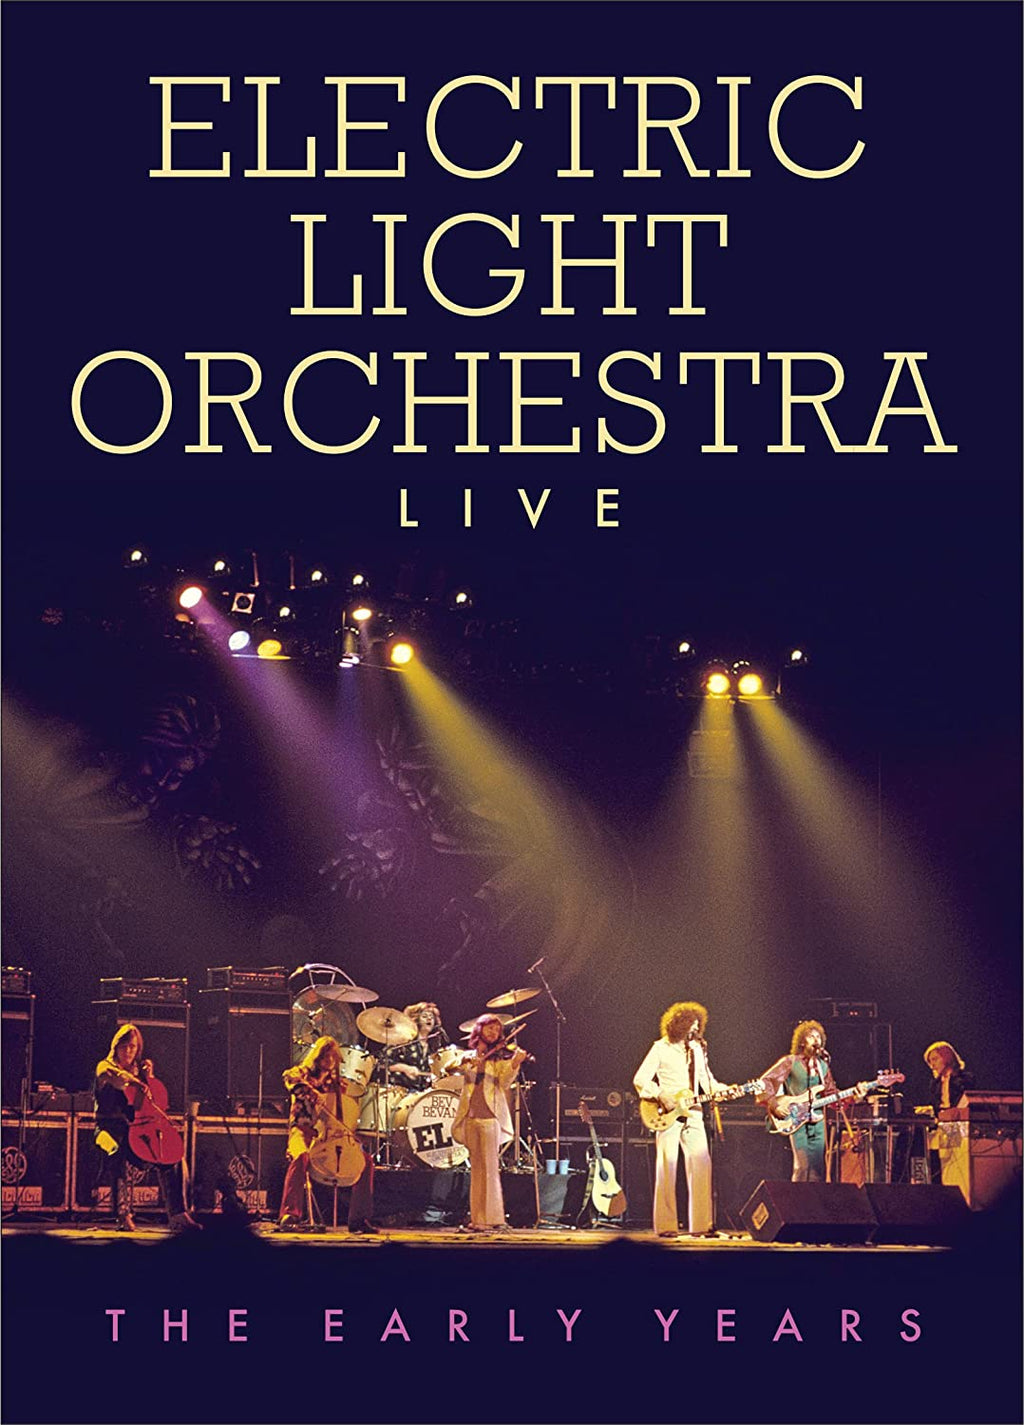 Electric Light Orchestra Live Vintage Music Art Poster 0935